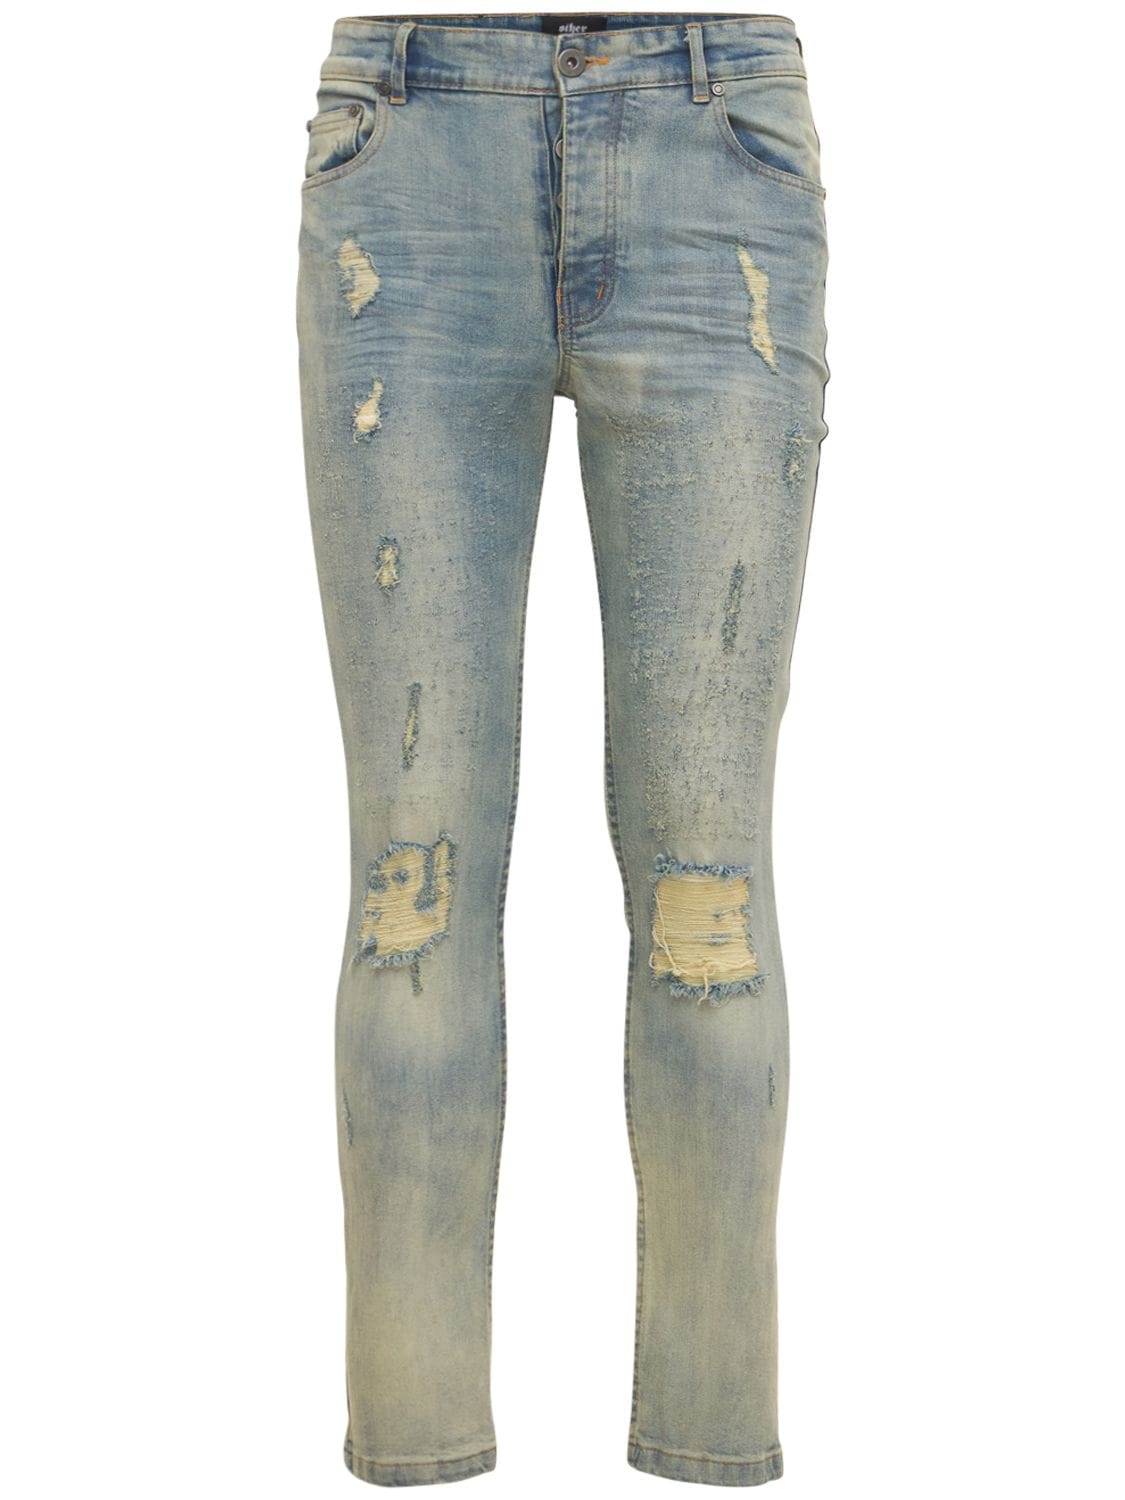 116 Trashed Distressed Skinny Jeans